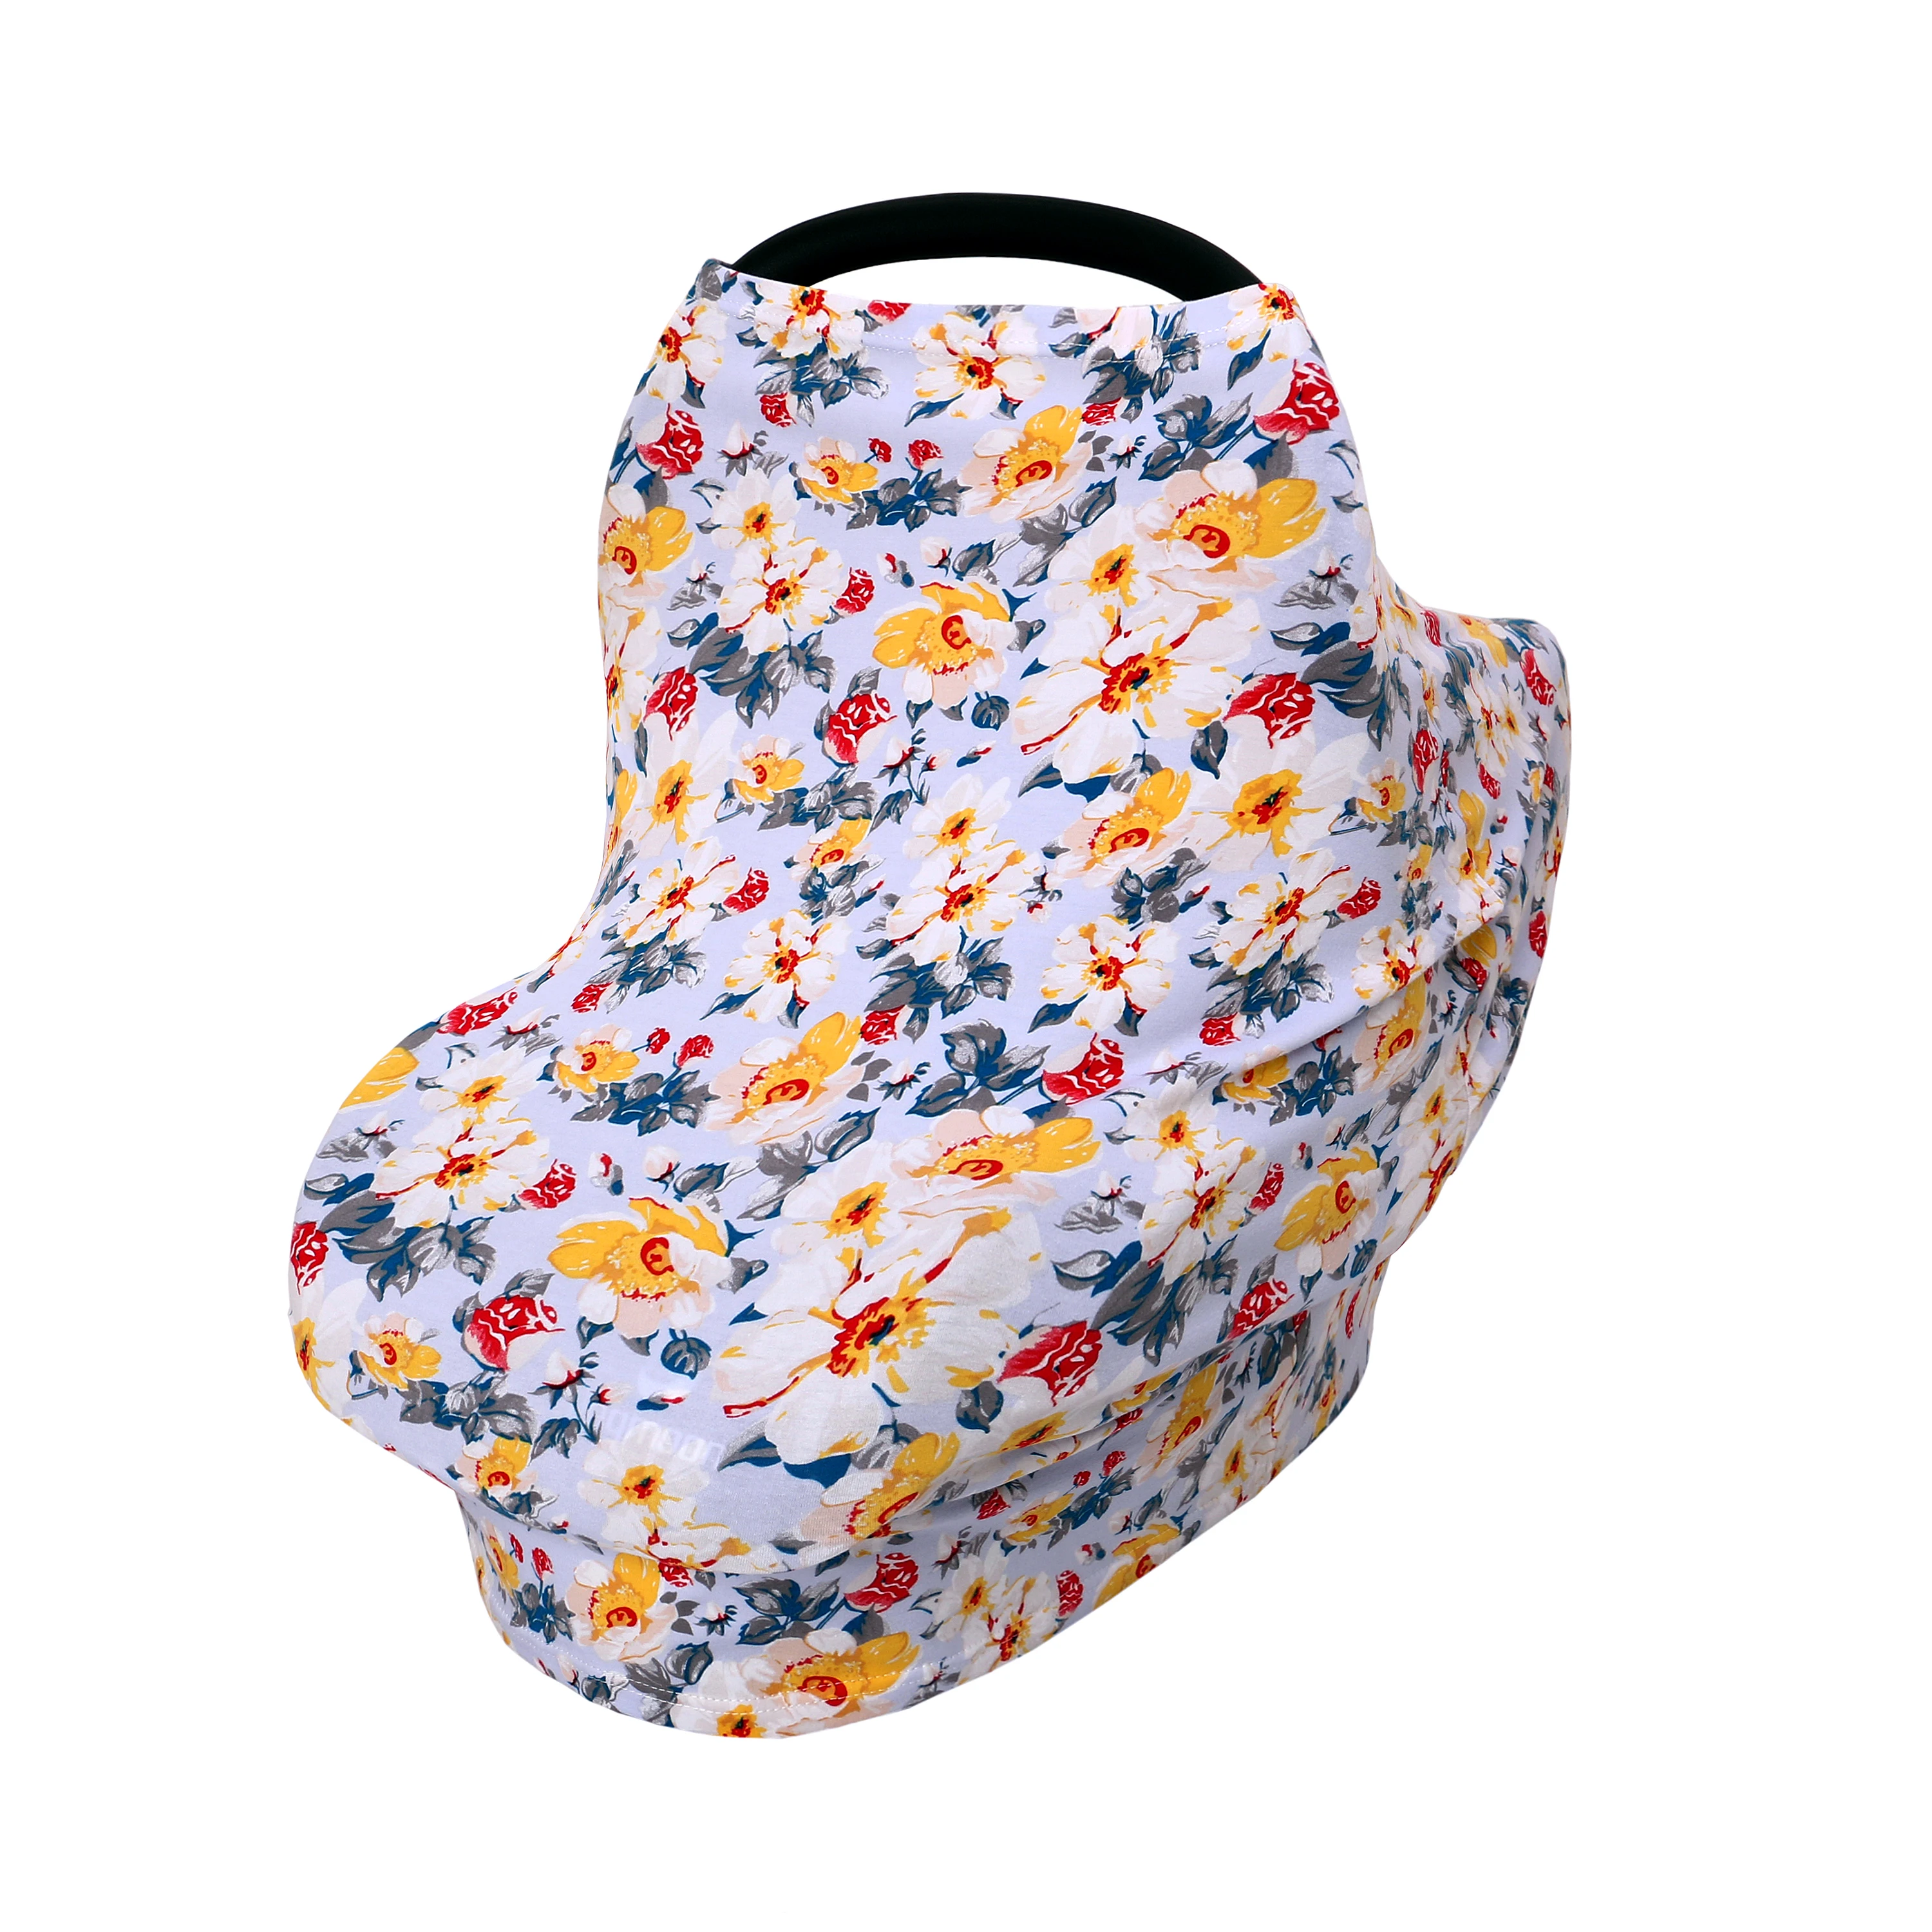 

Multiuse washable stroller cover apron spandex cotton canopy shopping cart cover breastfeeding toddler baby nursing cover scarf